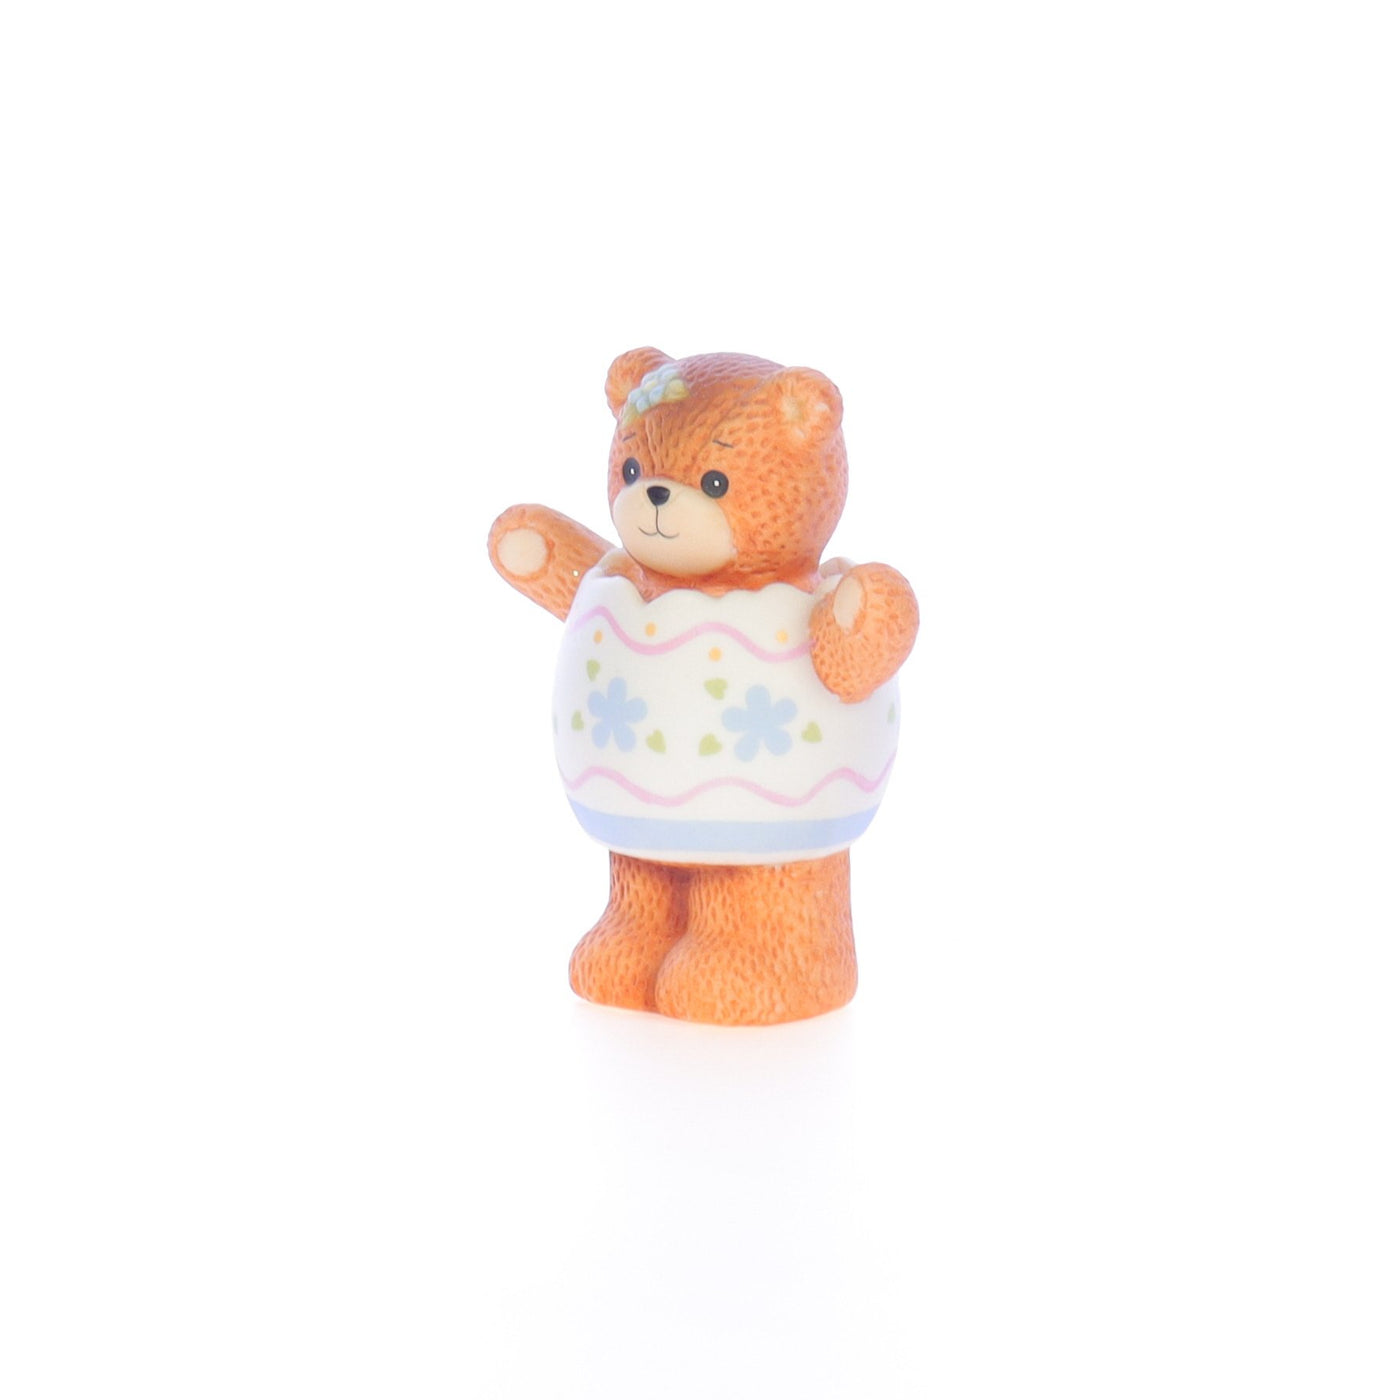 Lucy_And_Me_by_Lucy_Atwell_Porcelain_Figurine_Girl_Bear_with_Easter_Egg_Costume_Lucy_Unknown_062_02